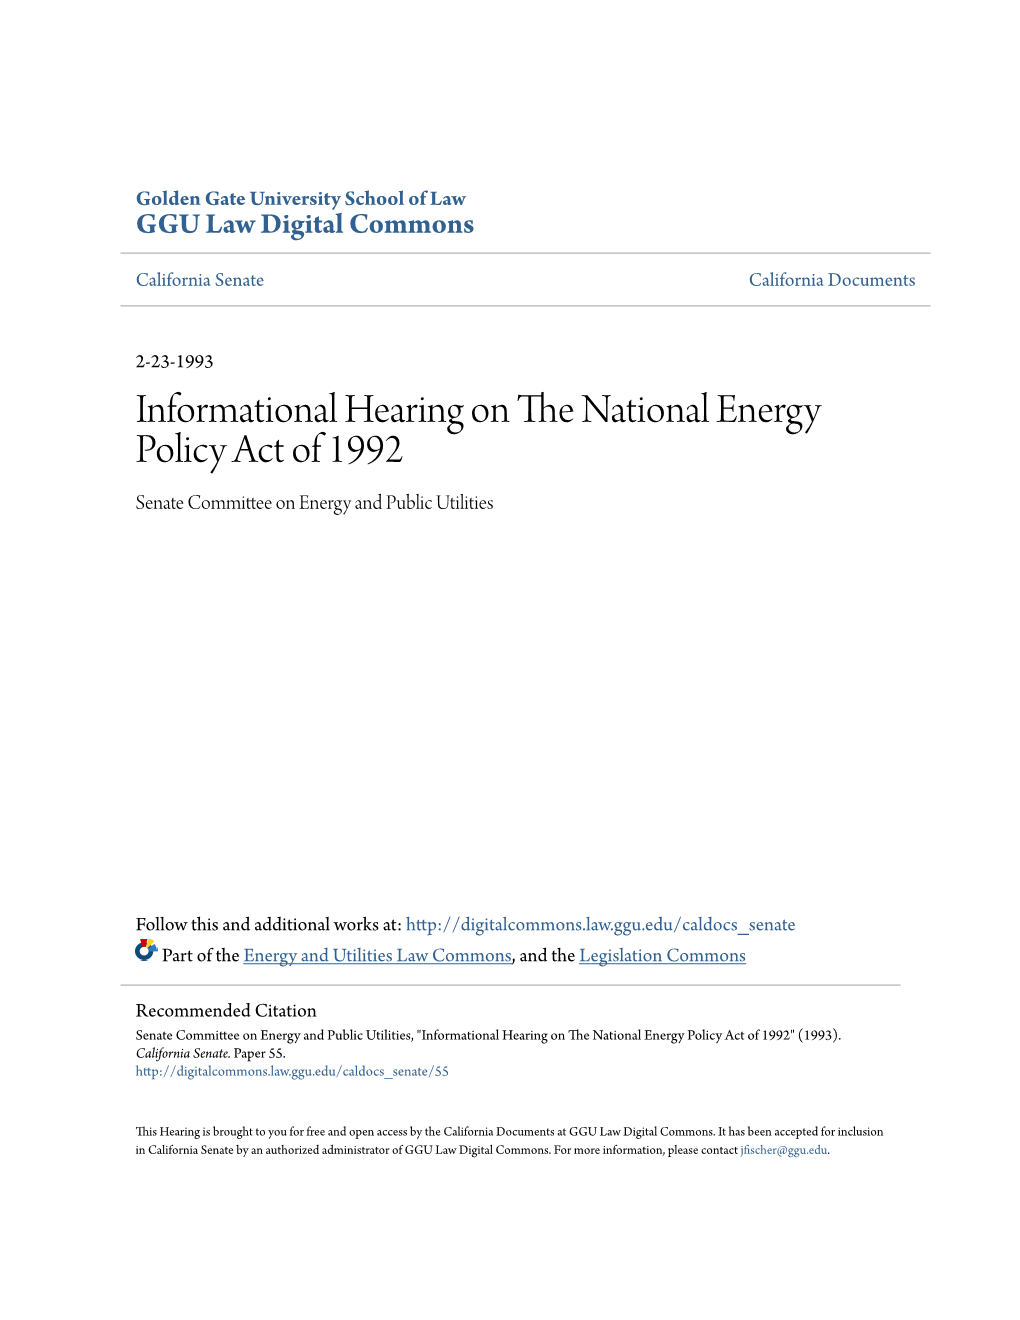 Informational Hearing on the National Energy Policy Act of 1992